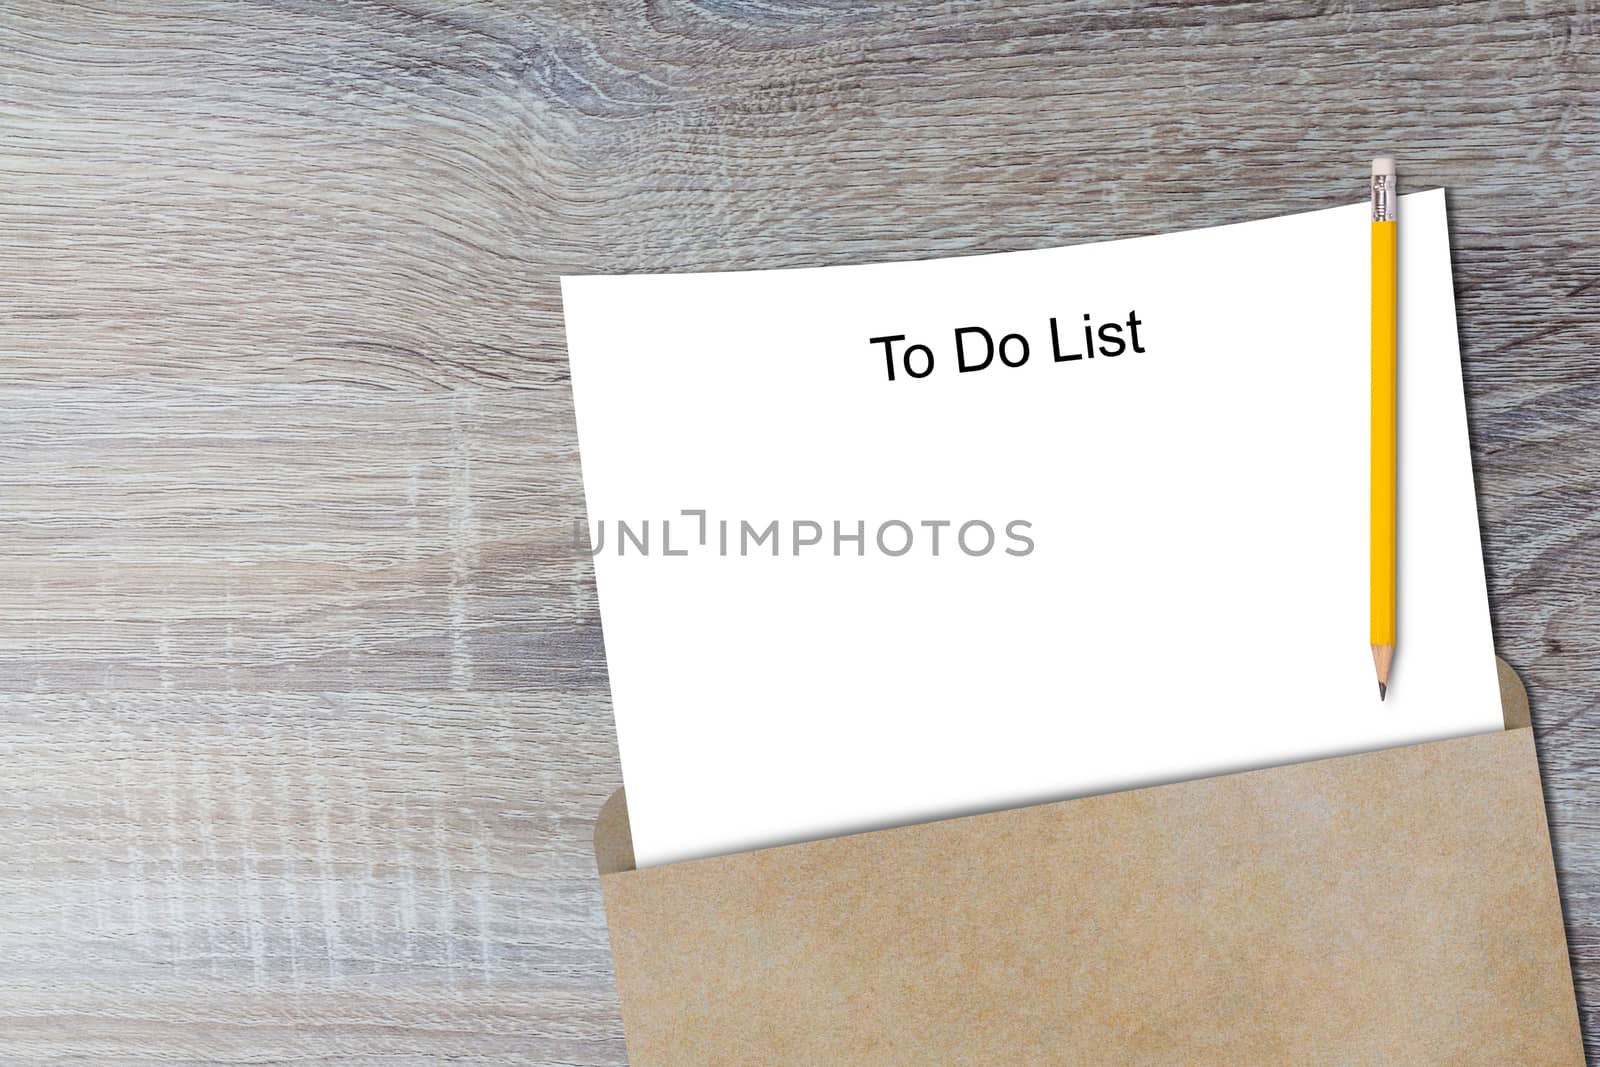 To do list concept, white paper and yellow pencil on wood background